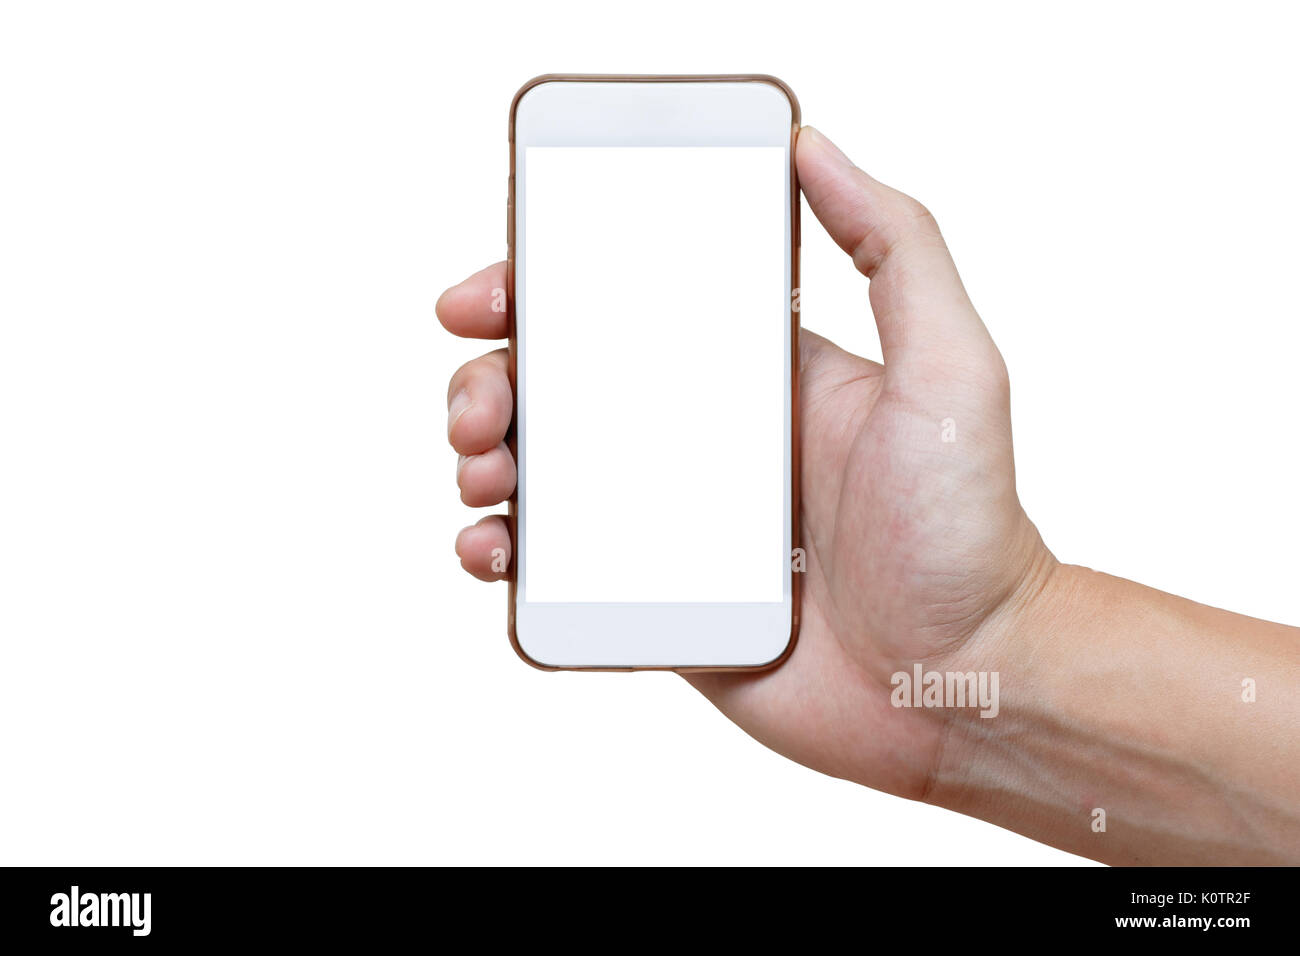 Human hand holding white phone on white screen isolated  with clipping path on hand and inside screen. Stock Photo